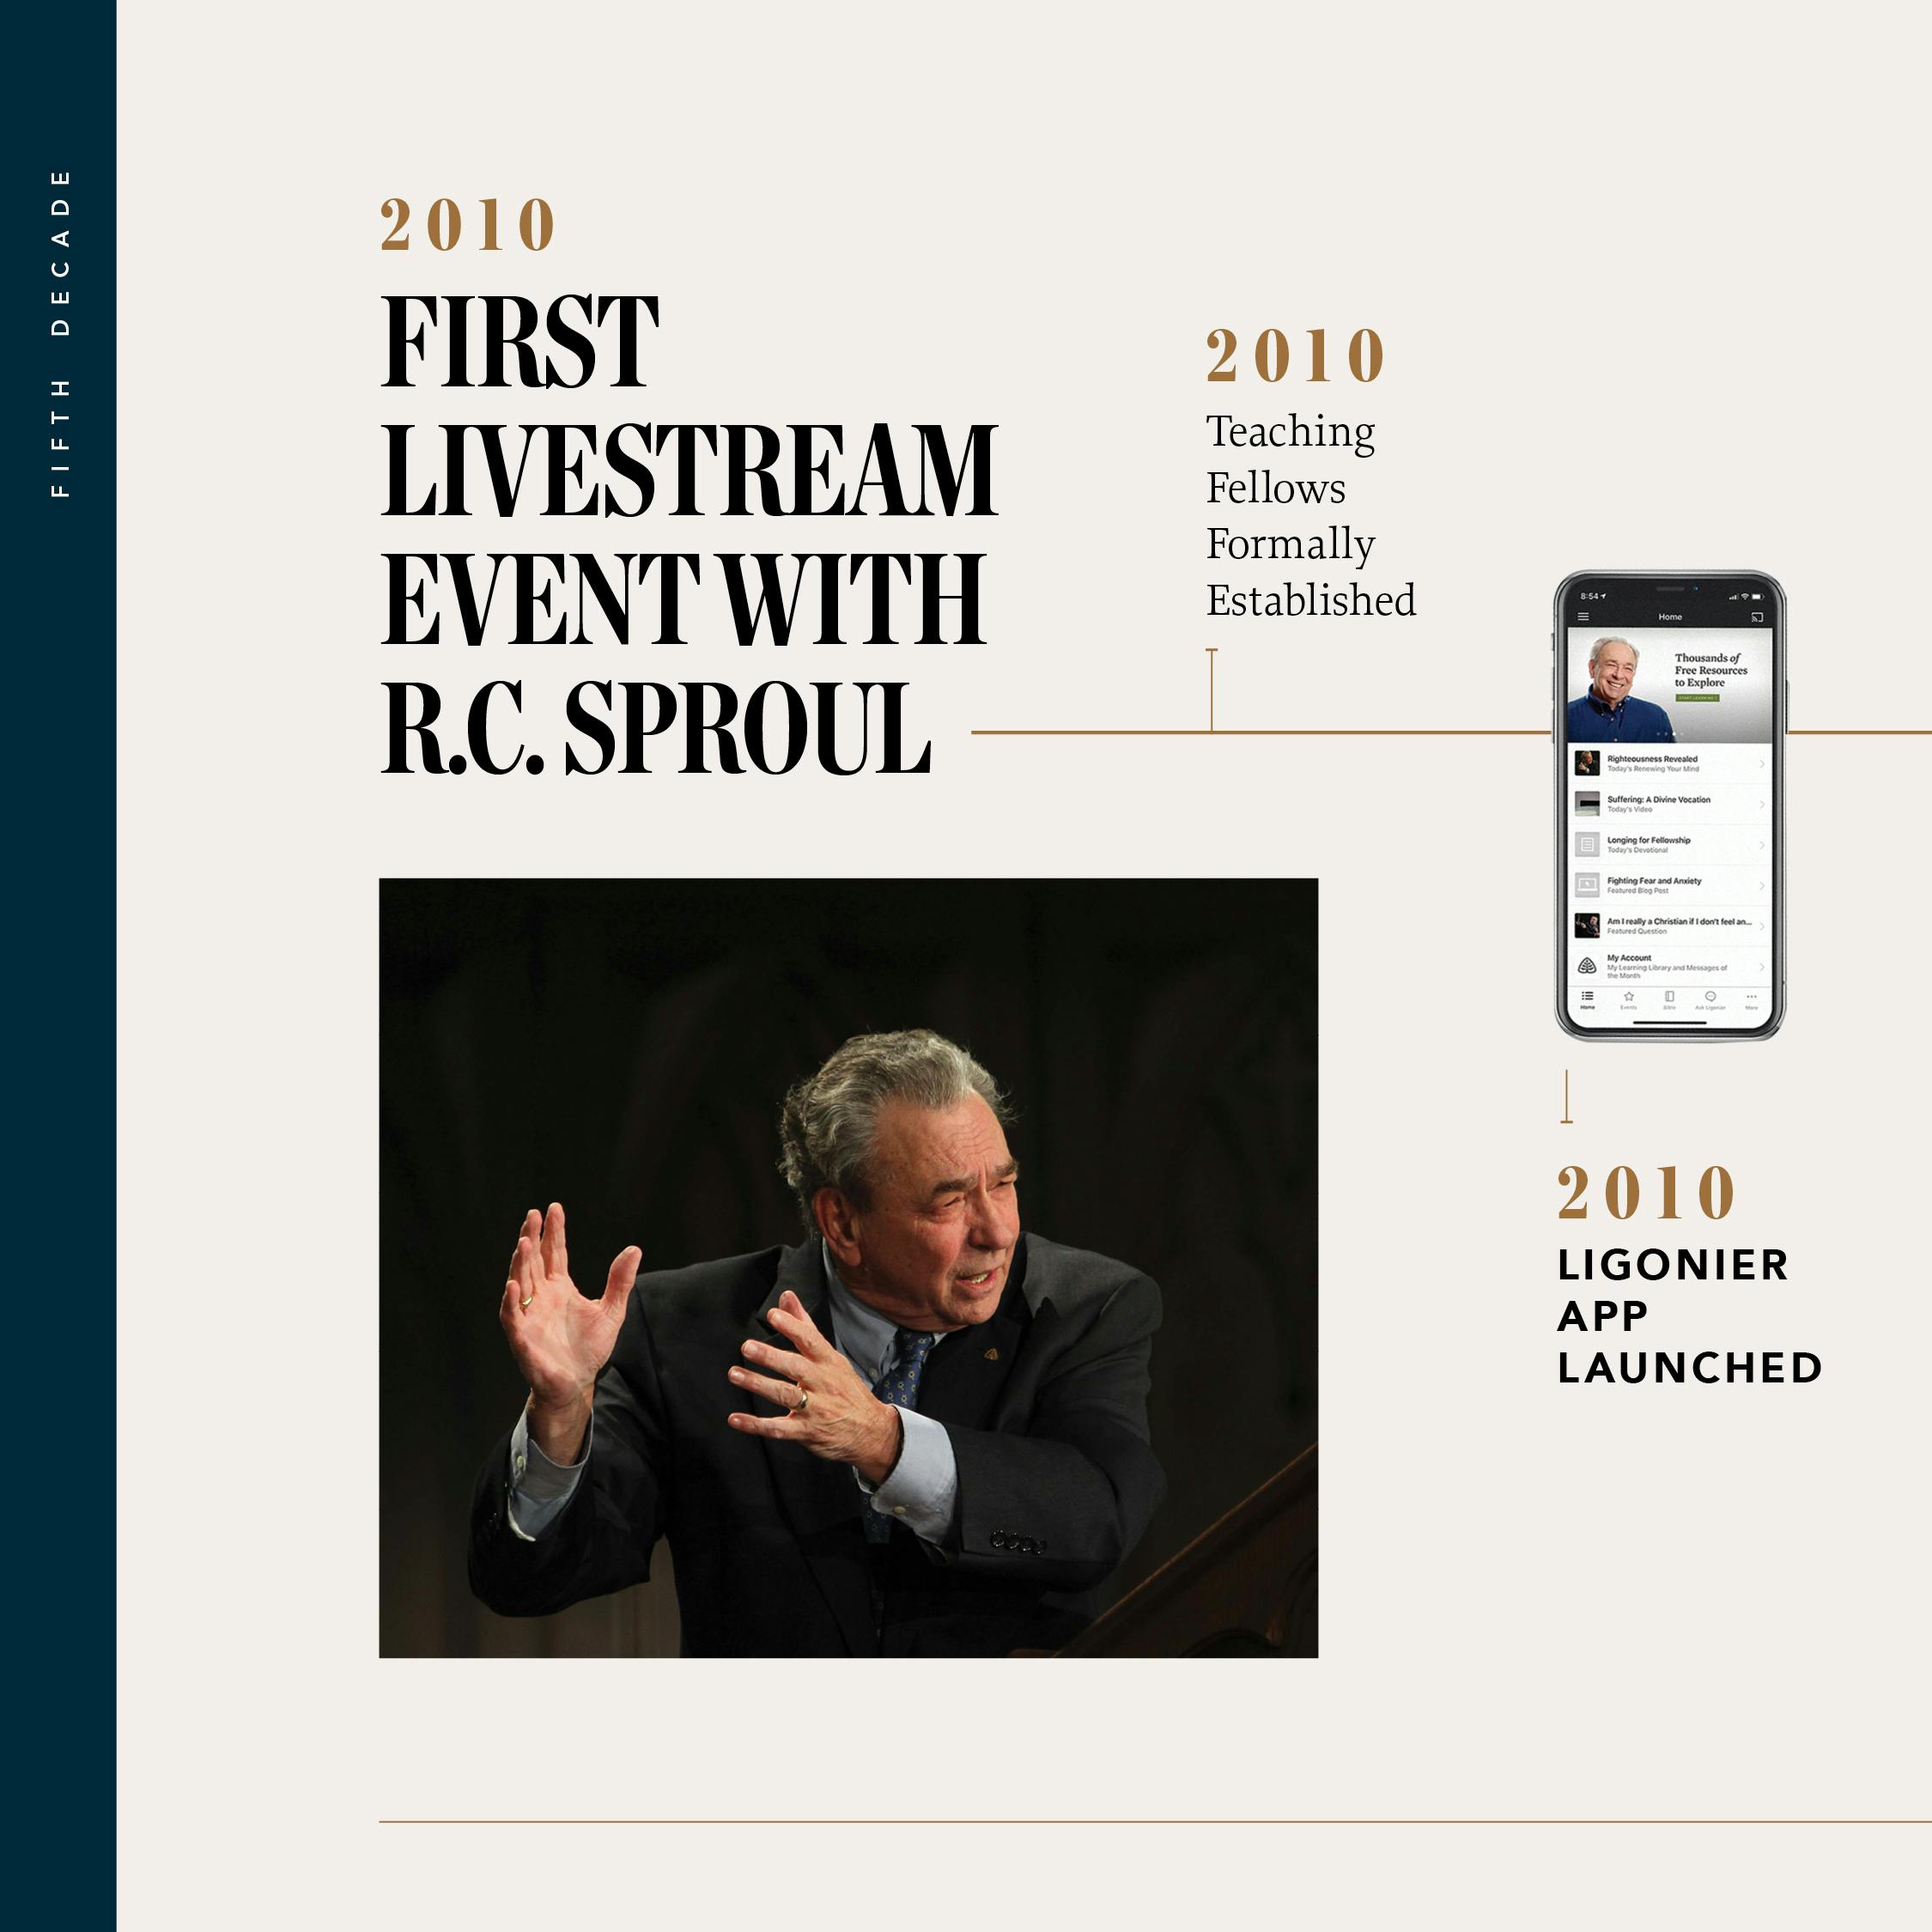 2010 :: First livestream event with R.C. Sproul :: 2010 :: Ligonier Teaching Fellows formally established :: 2010 :: Ligonier app launched